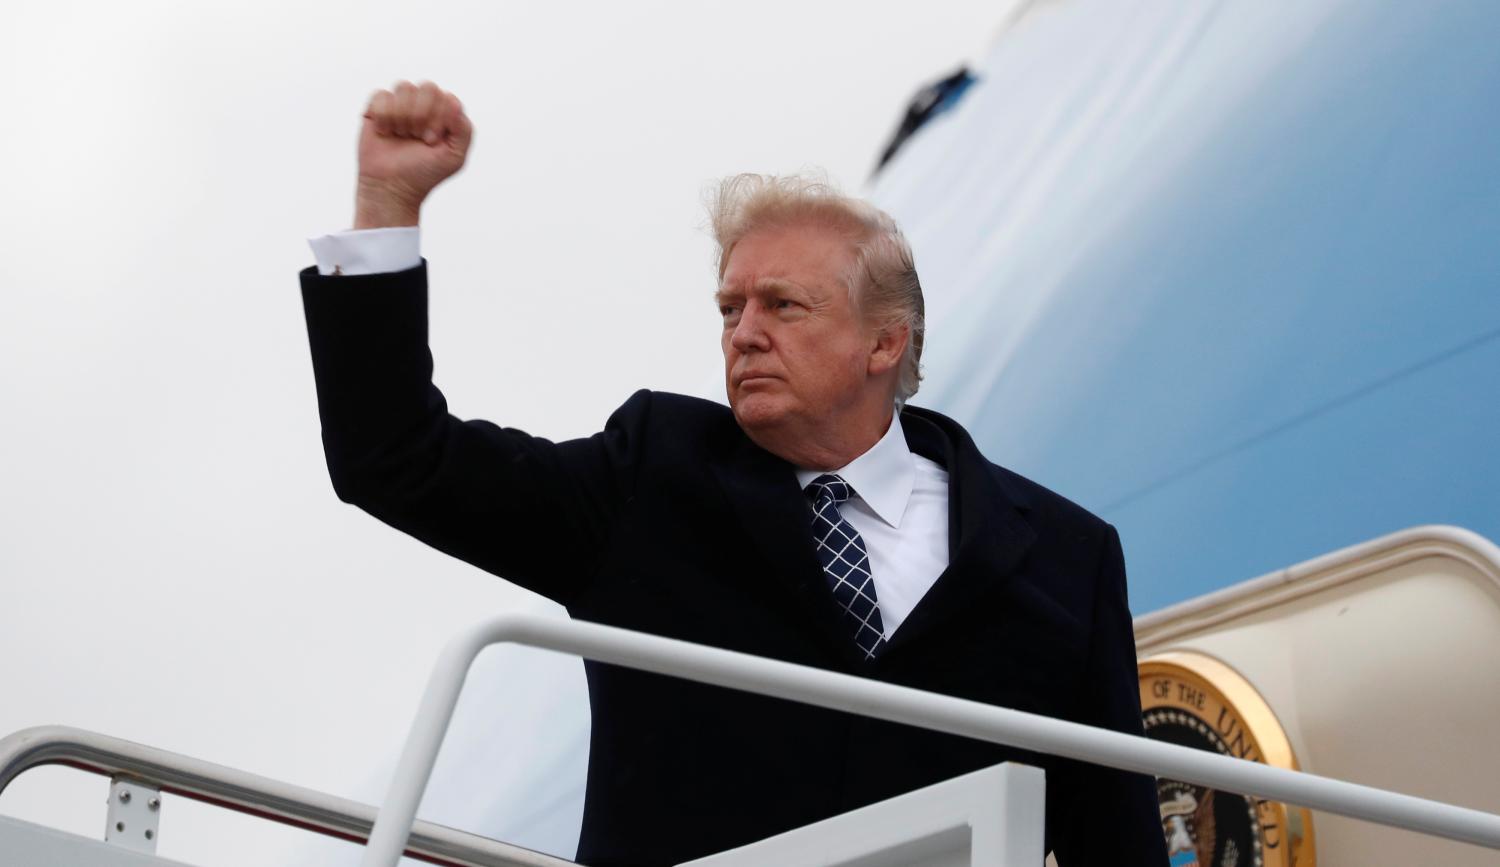 U.S. President Donald Trump pumps his fist as he boards Air Force One upon departure from Joint Base Andrews in Maryland